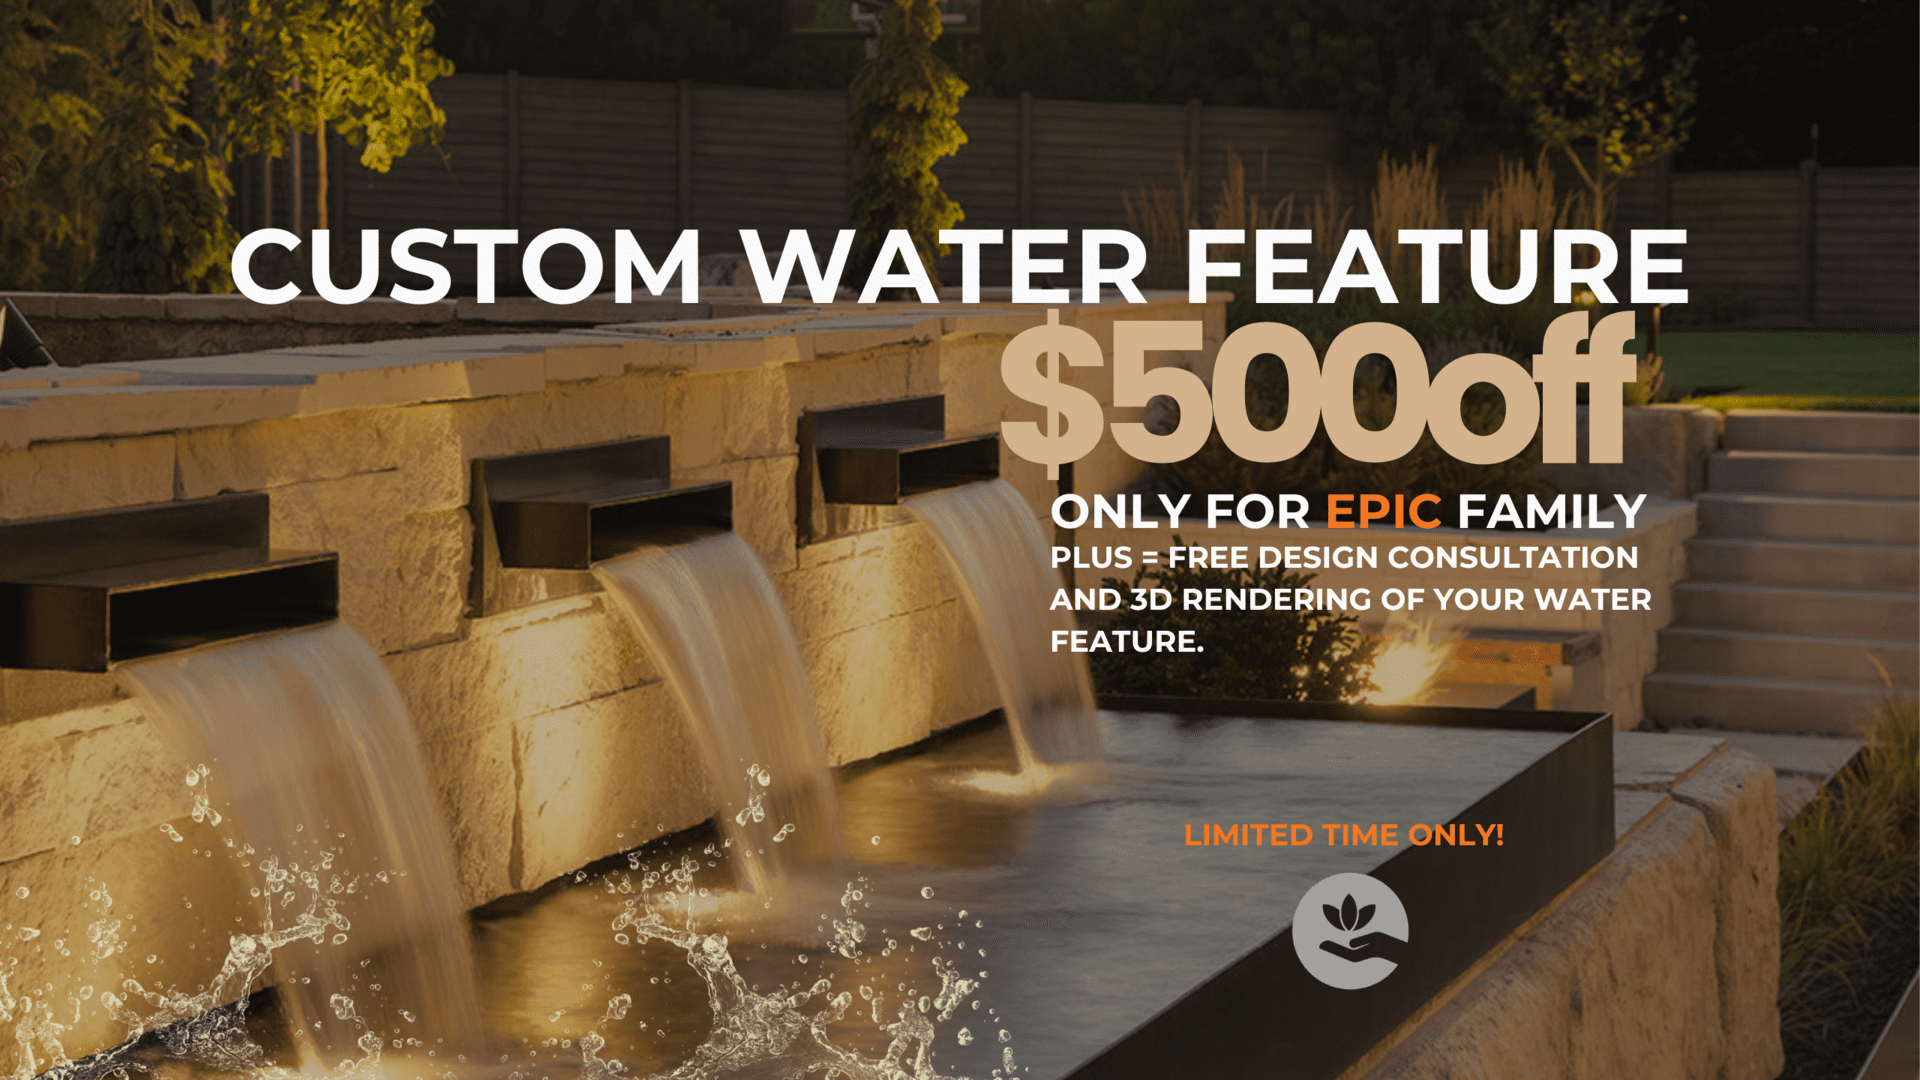 Custom water feature $500 off only for EPIC family plus = free design consultation and 3D rendering of your water feature